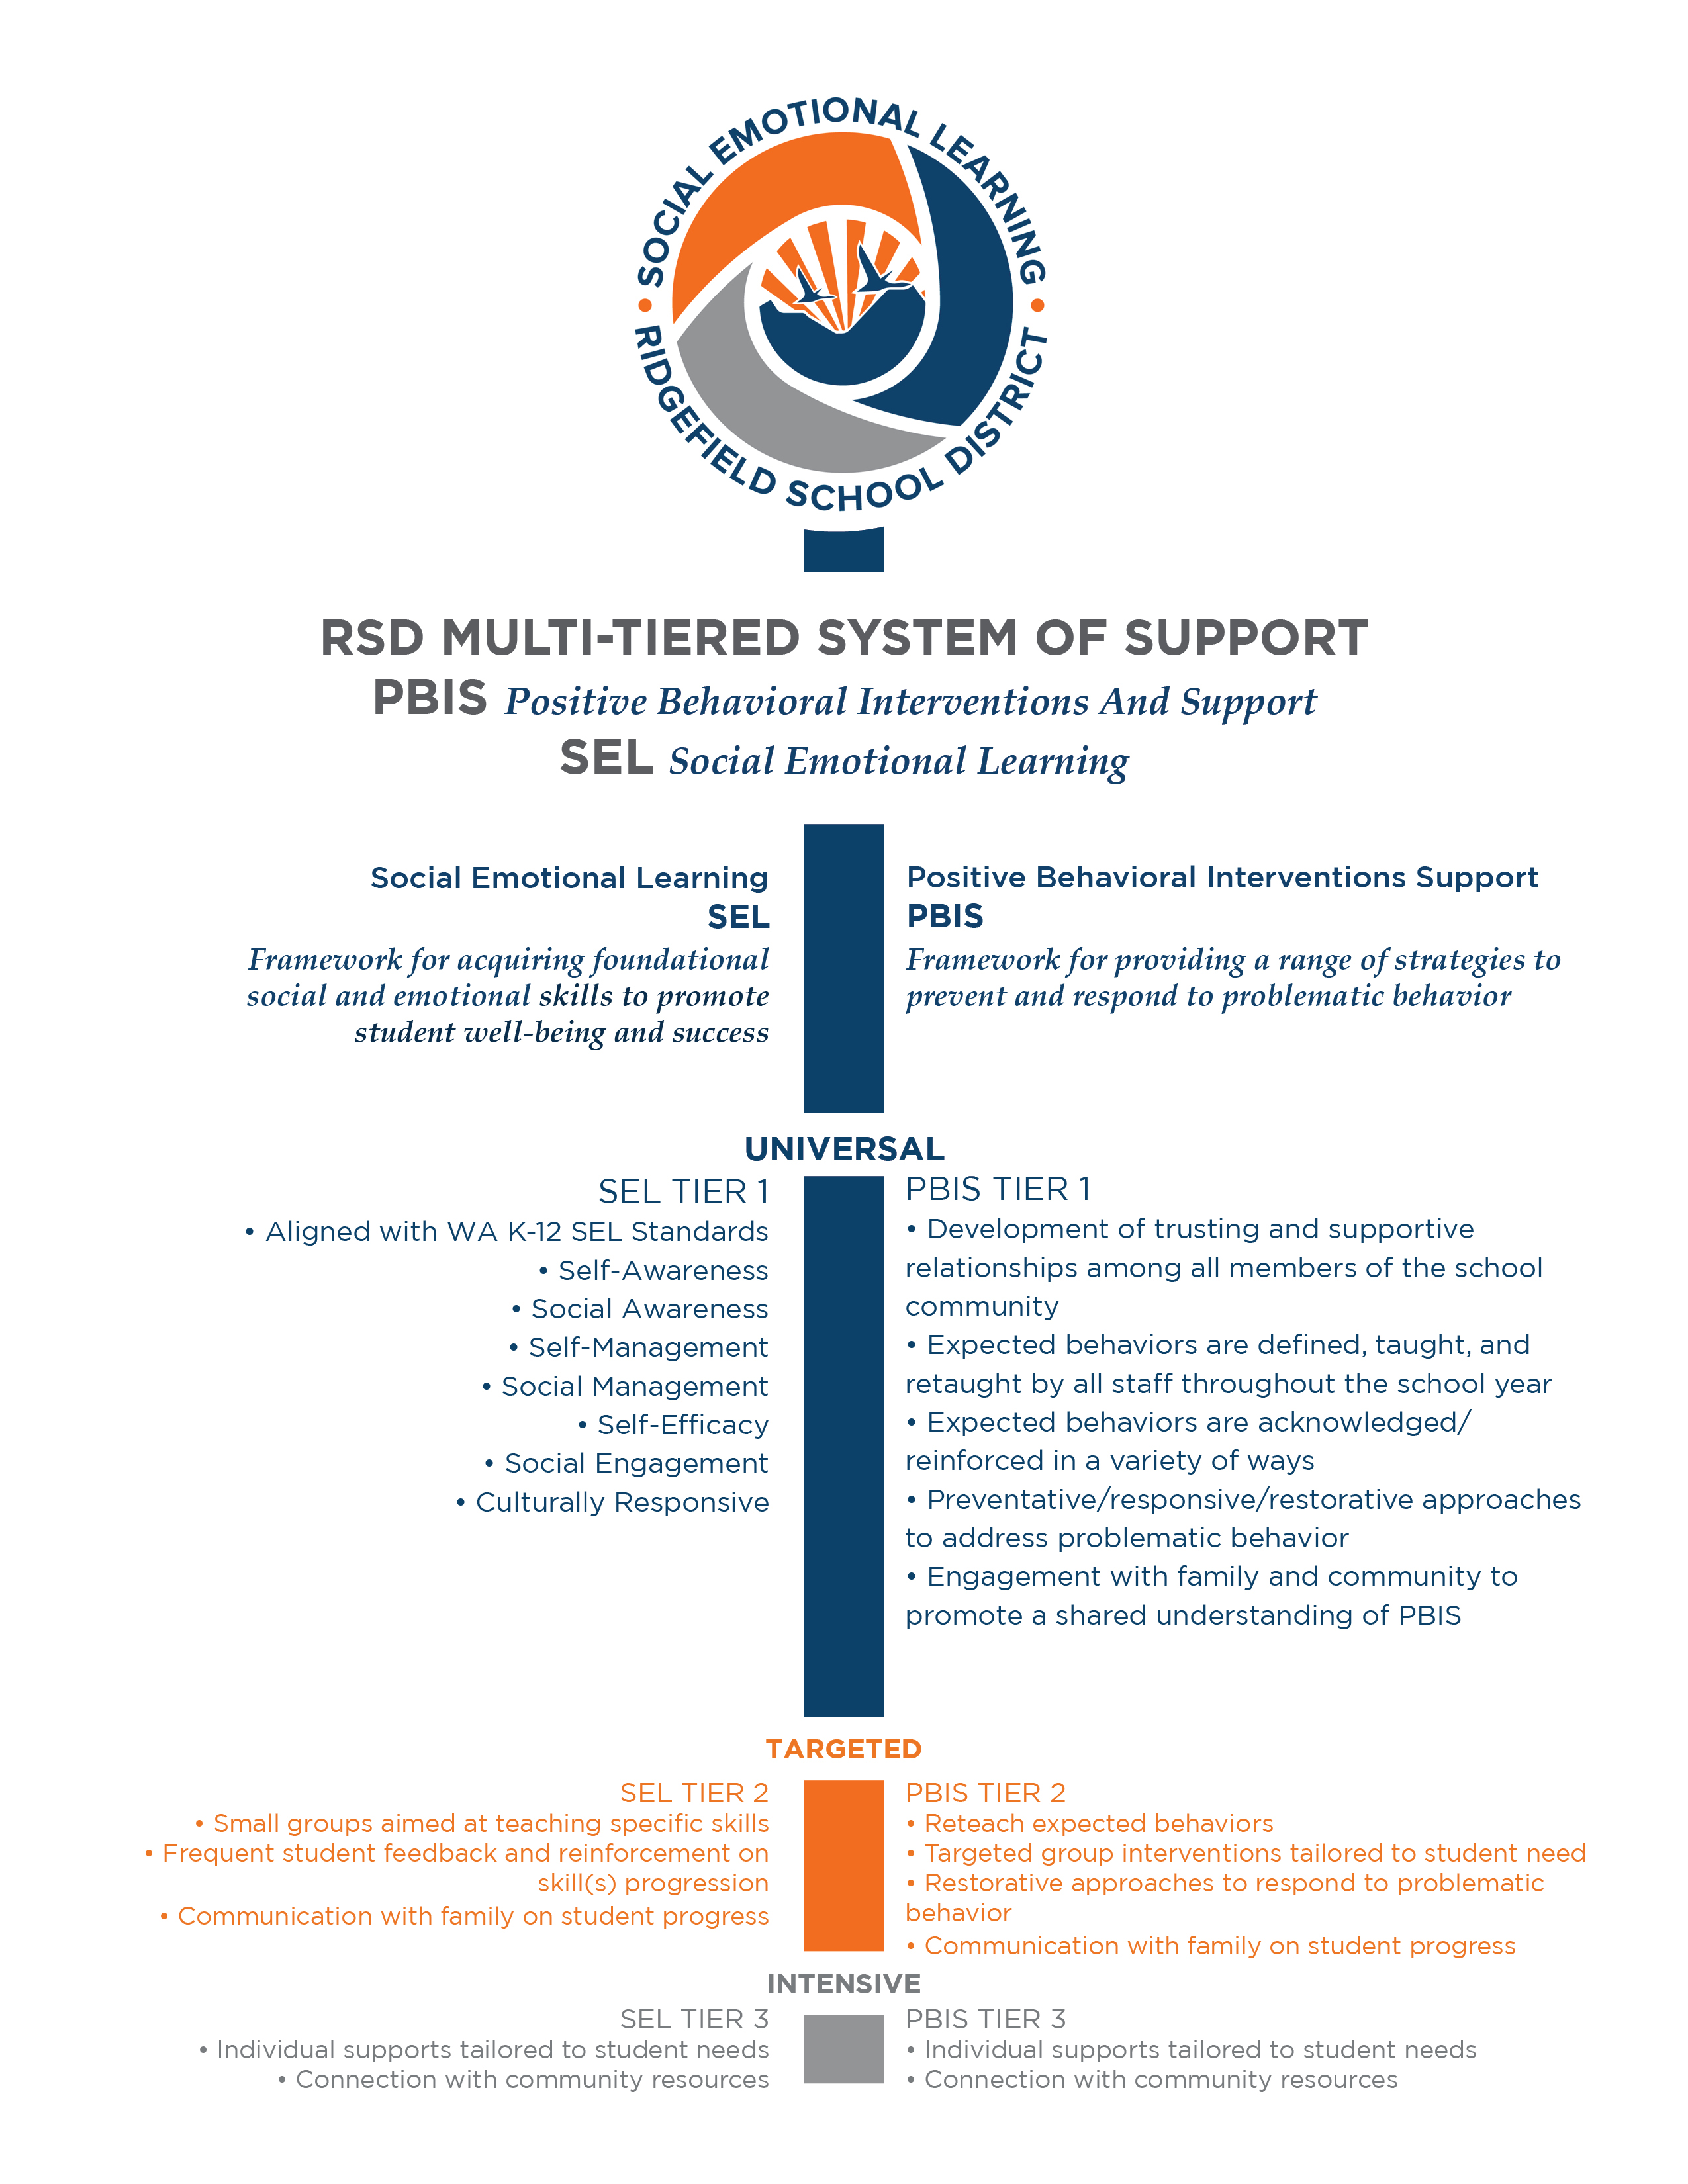 PBIS AND SEL